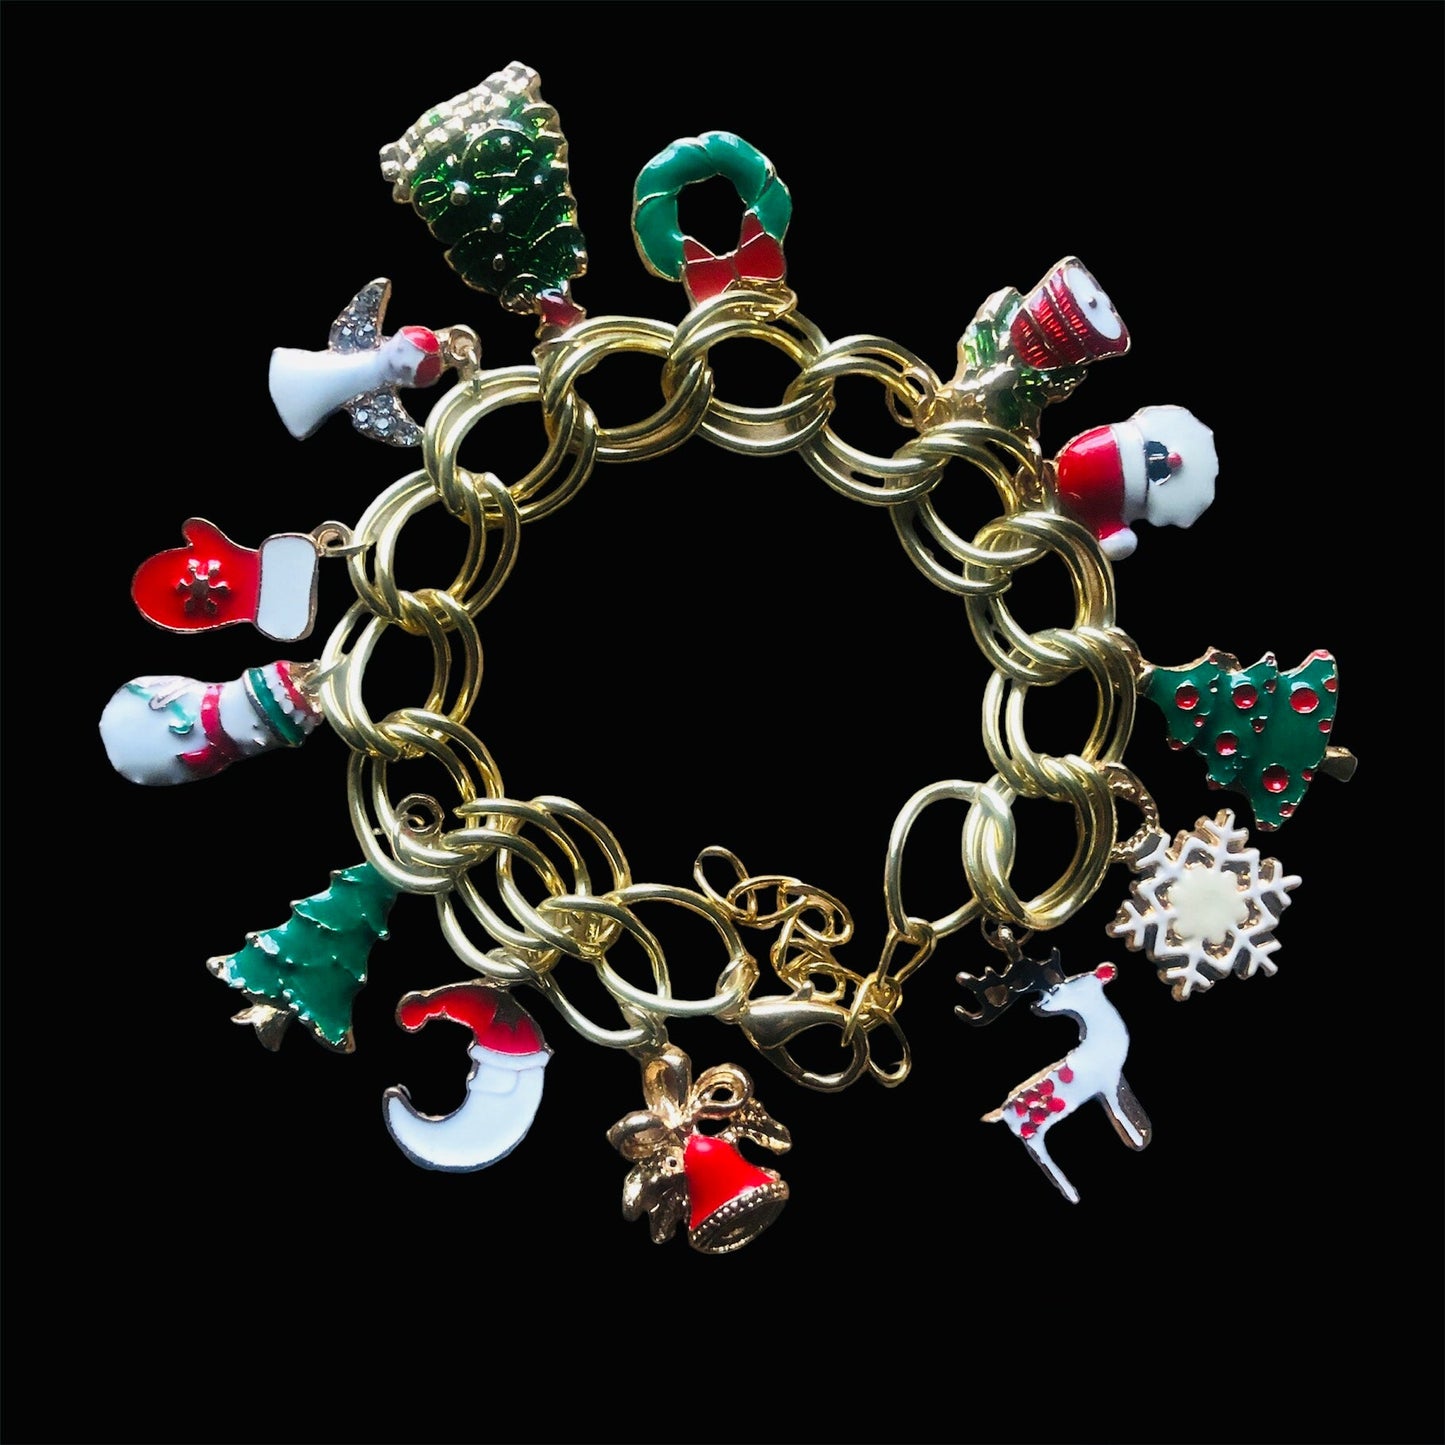 Christmasy Gold-plated Charm Bracelet KAS WARWAS